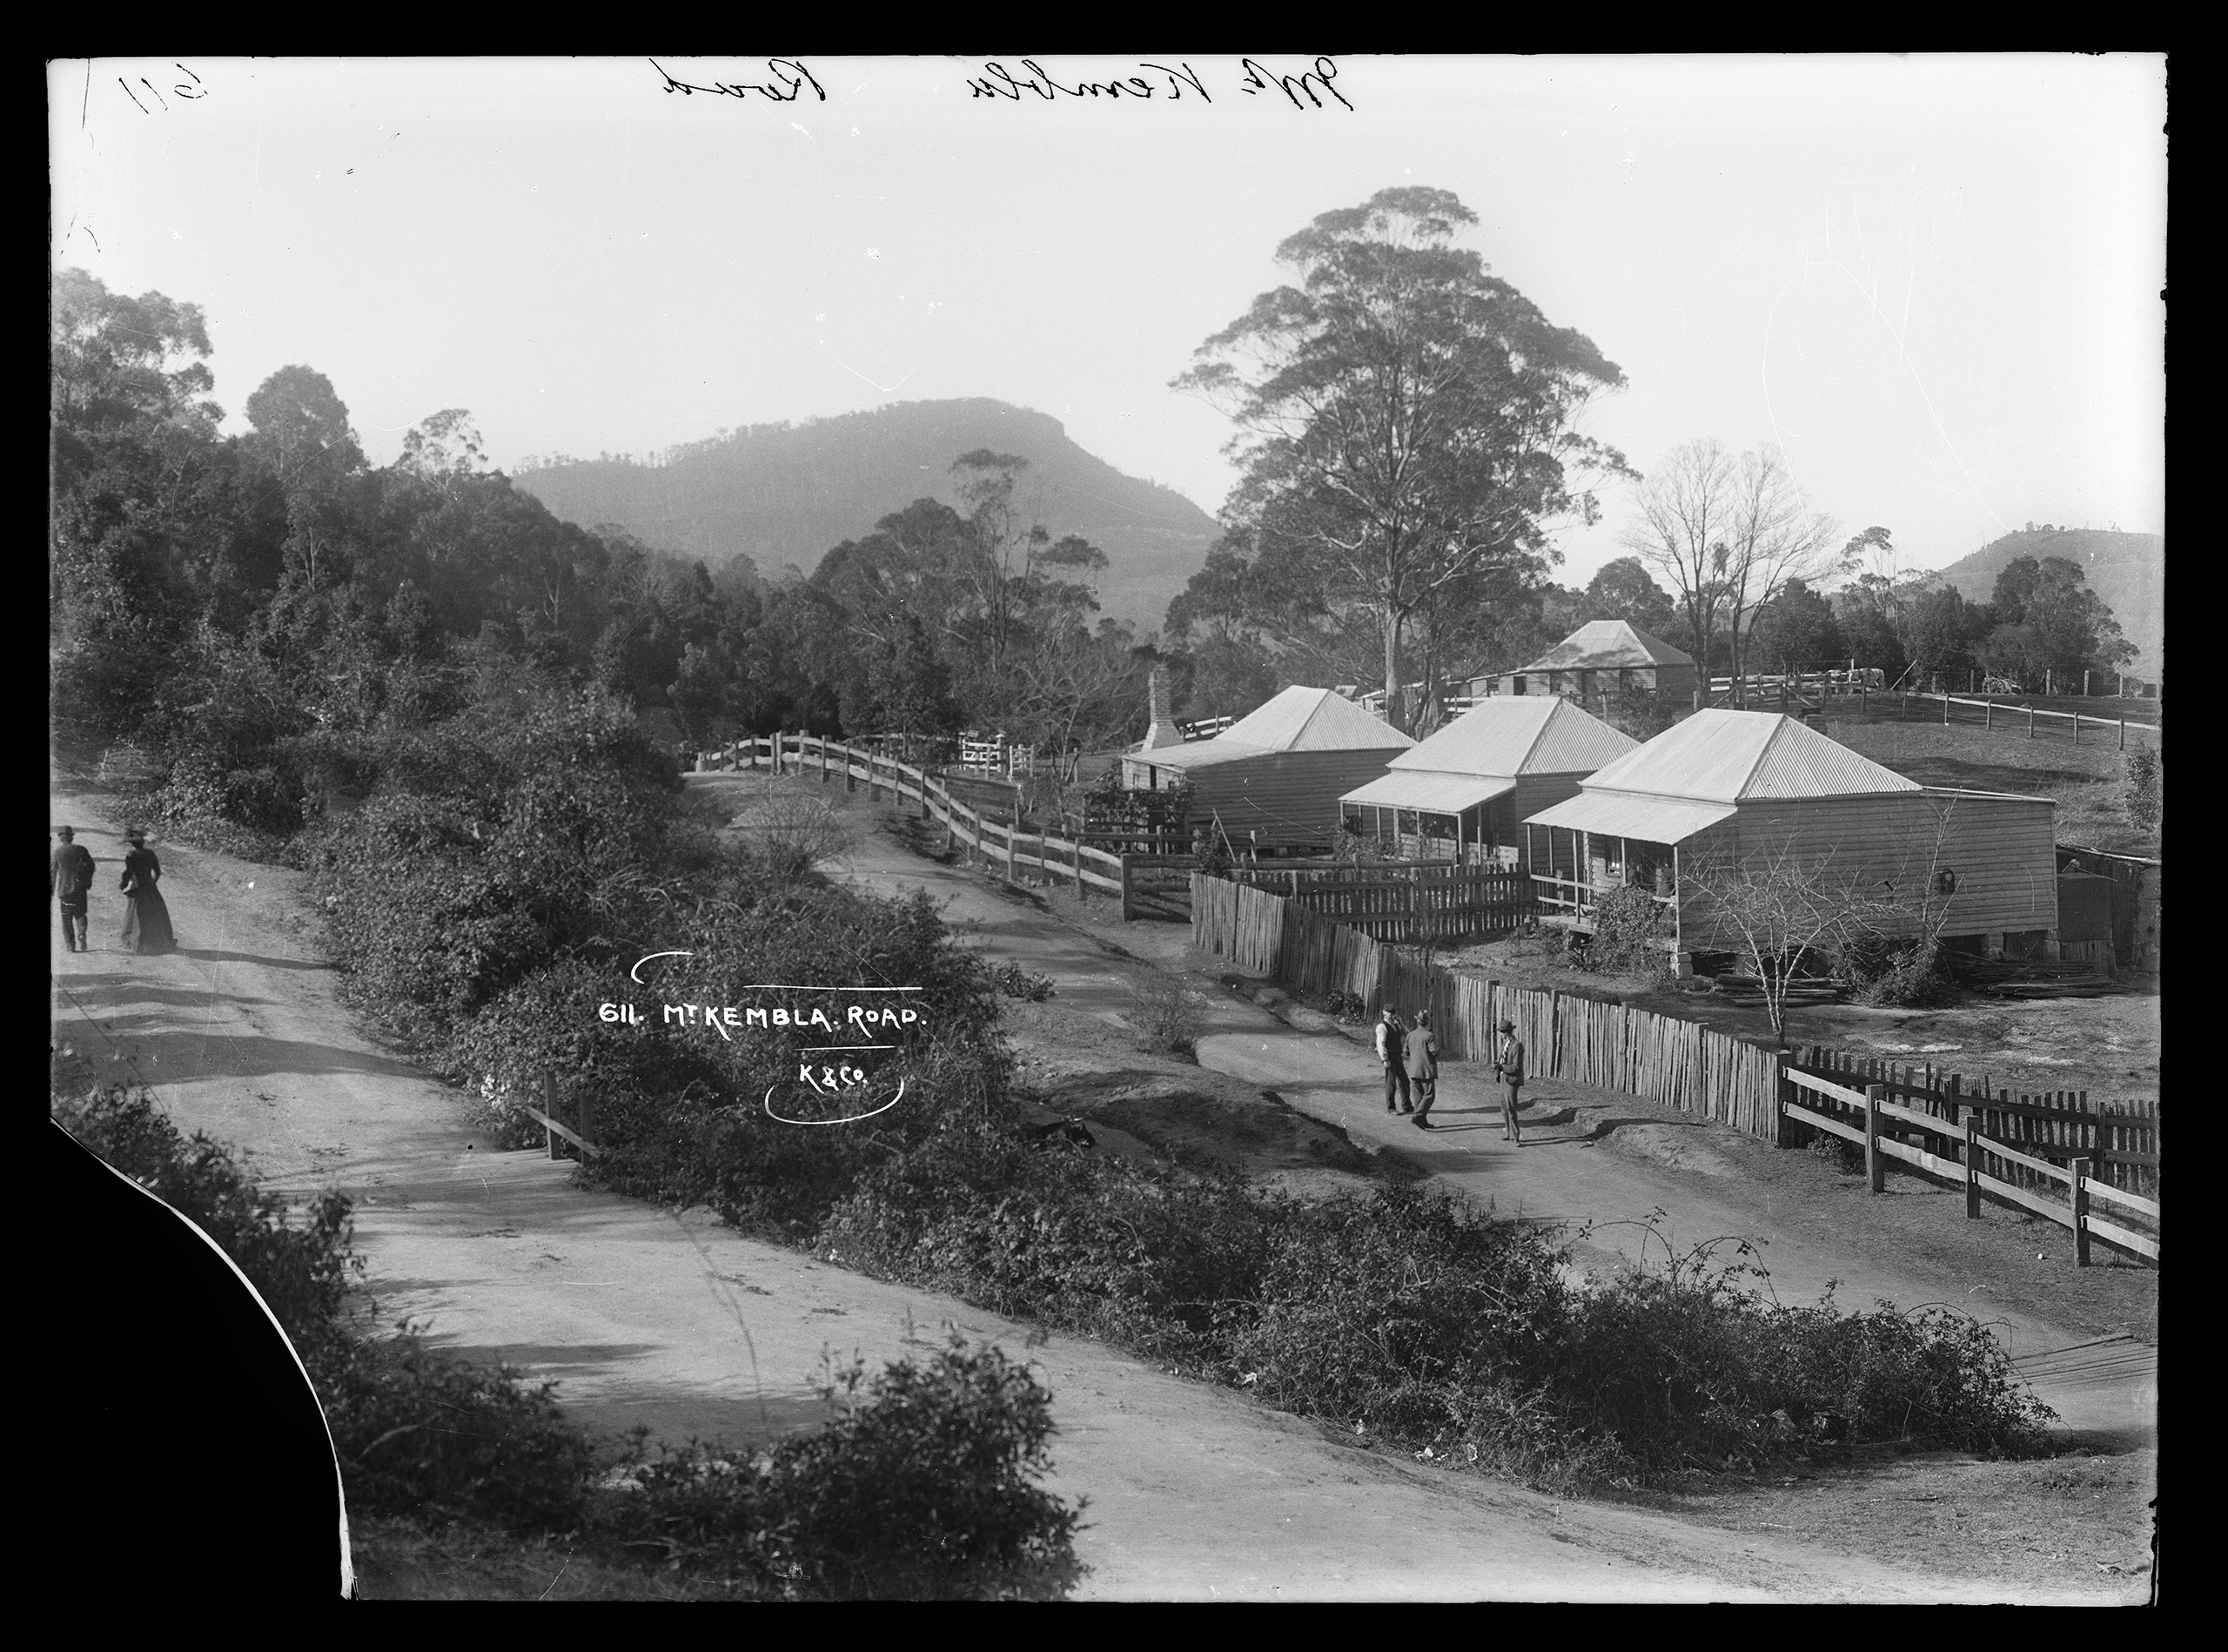 'Mt Kembla Road' by Kerry and Co from the Tyrrell collection